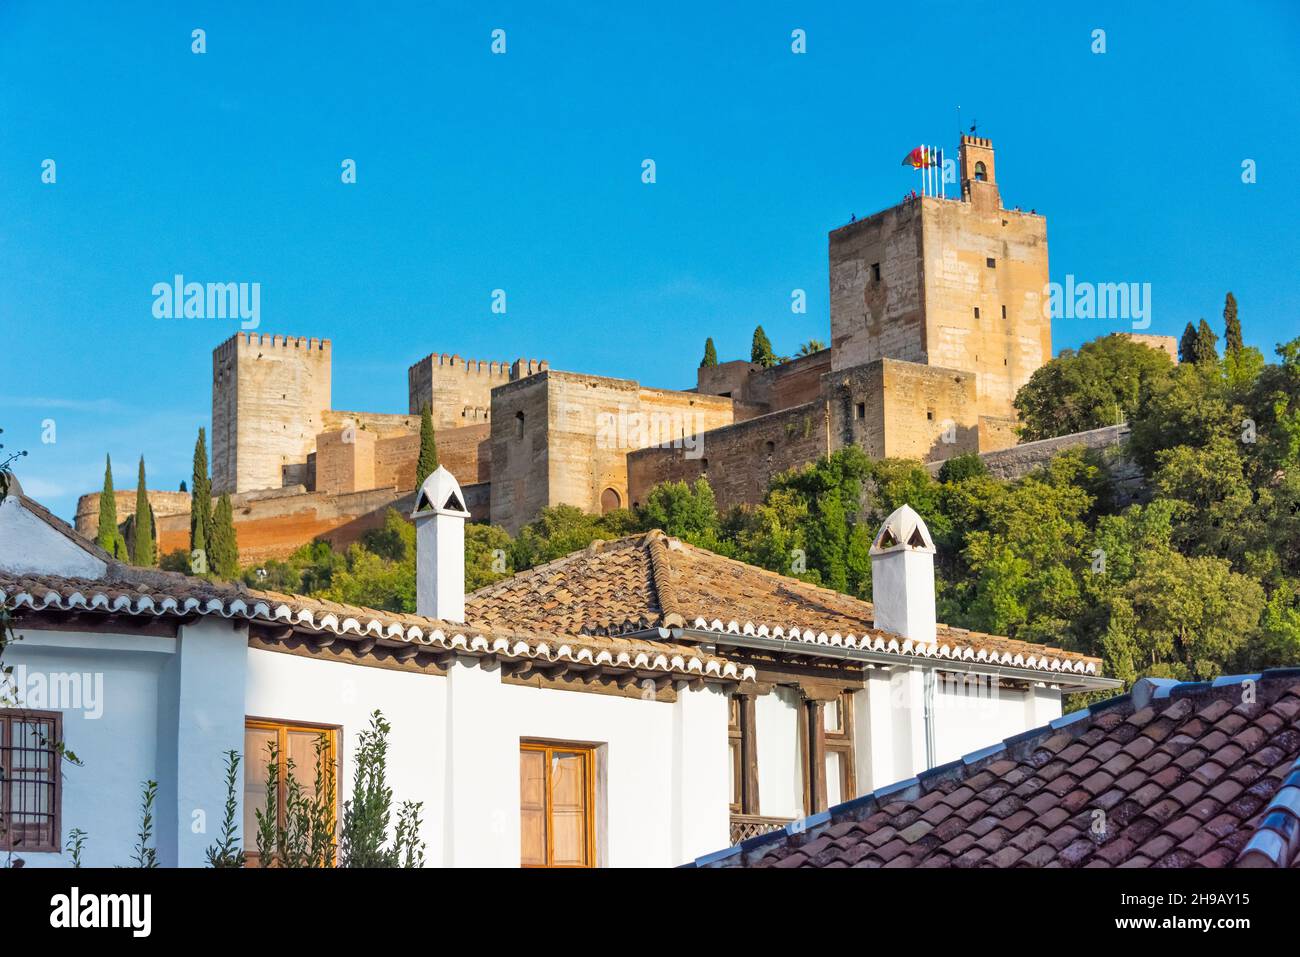 Fortress towers of Alhambra with houses in Albaicin, the old Arab quarter, Granada, Granada Province, Andalusia Autonomous Community, Spain Stock Photo